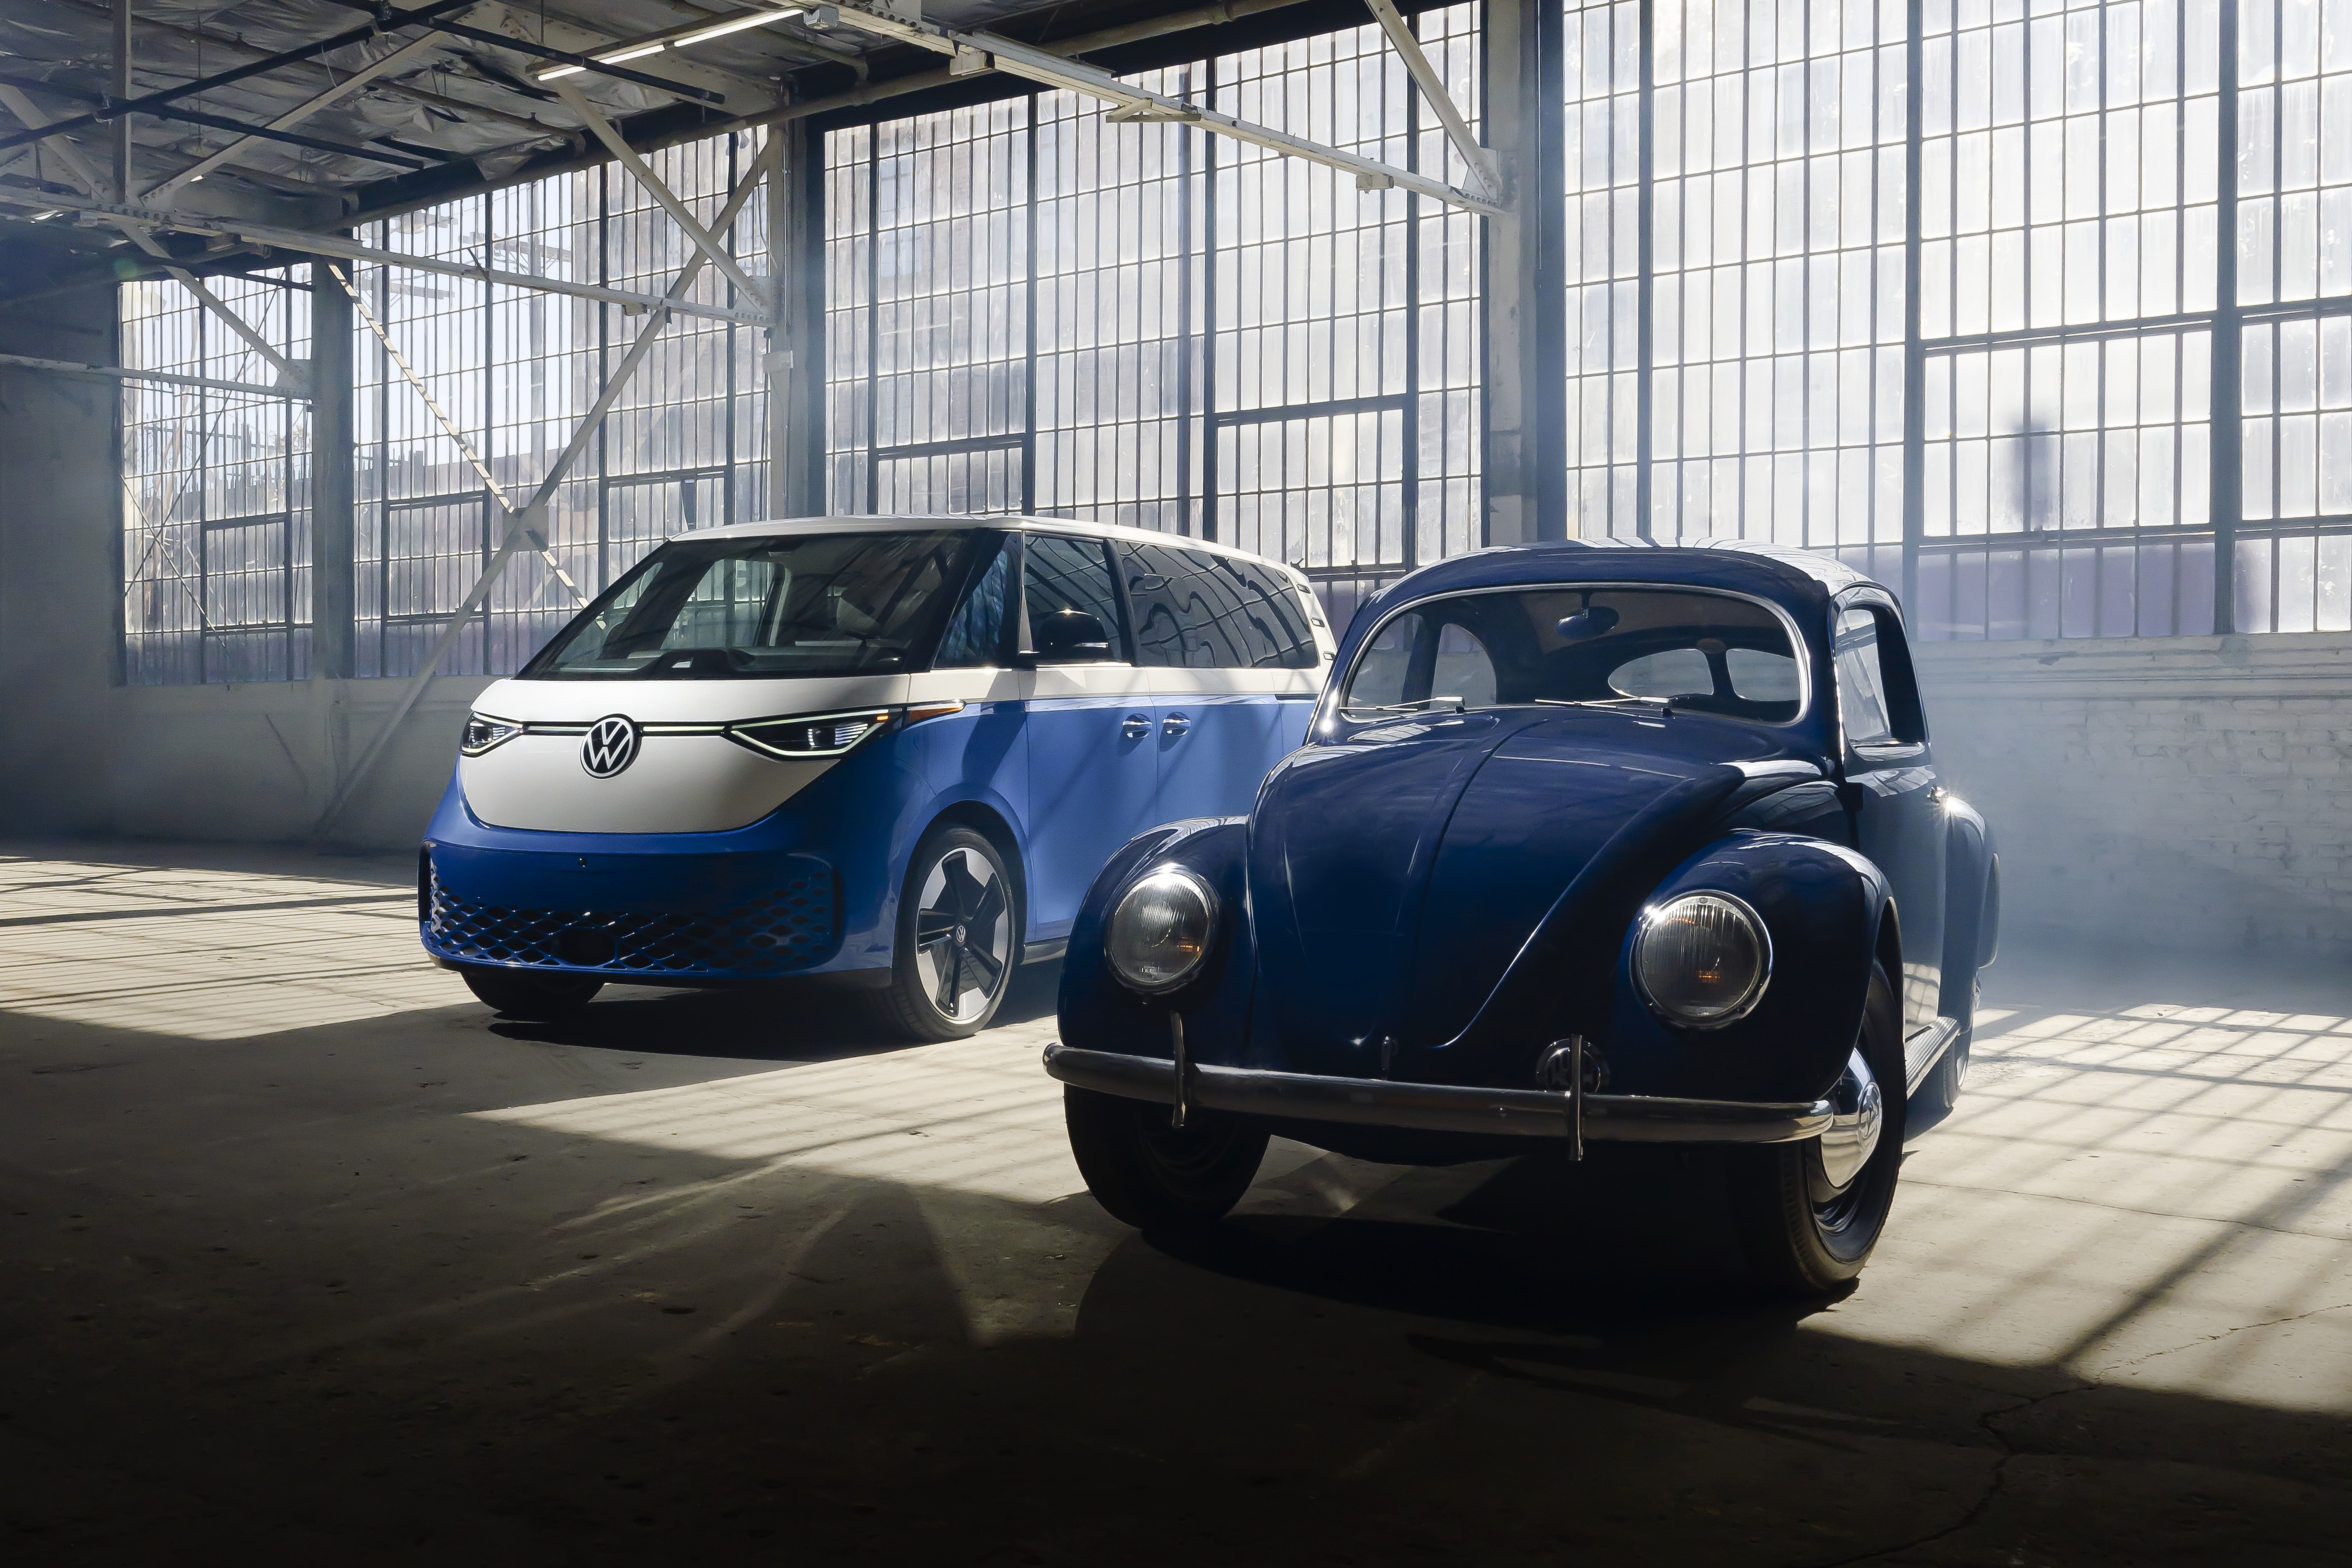 Volkswagen Celebrates 75 Years Since the First Type 1 Beetle Rolled into the United States